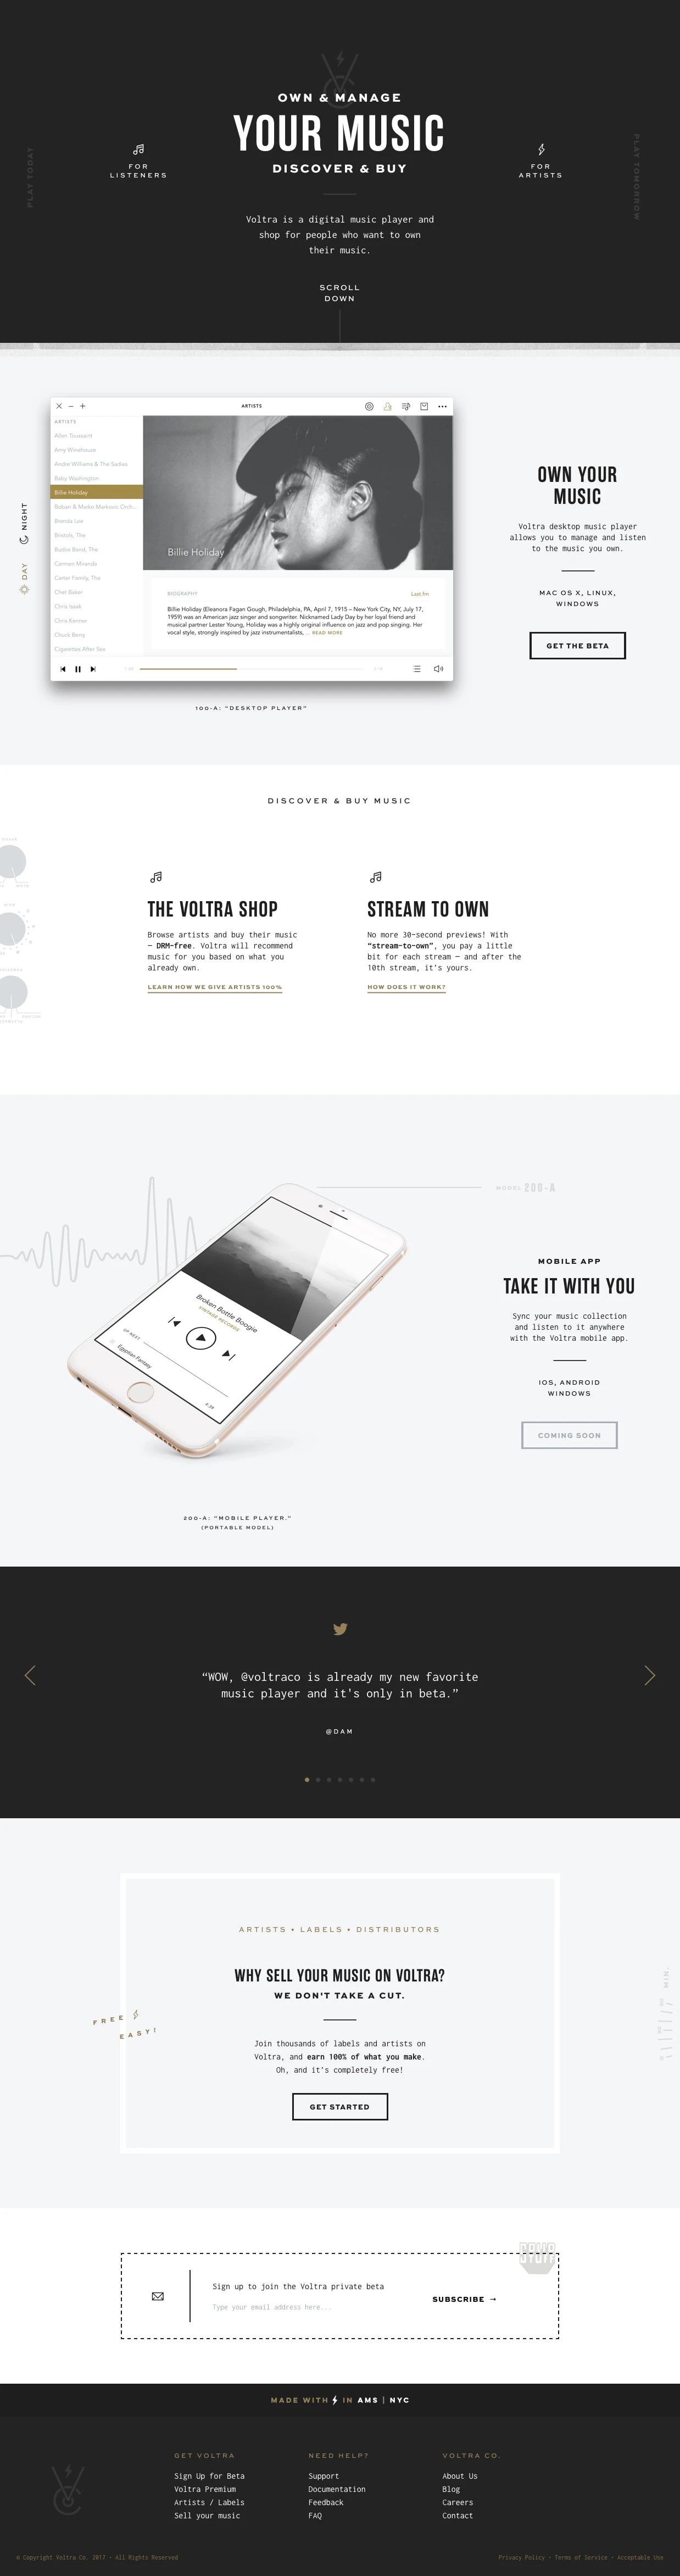 Voltra Landing Page Example: Voltra is a digital music player and shop for people who want to own their music.